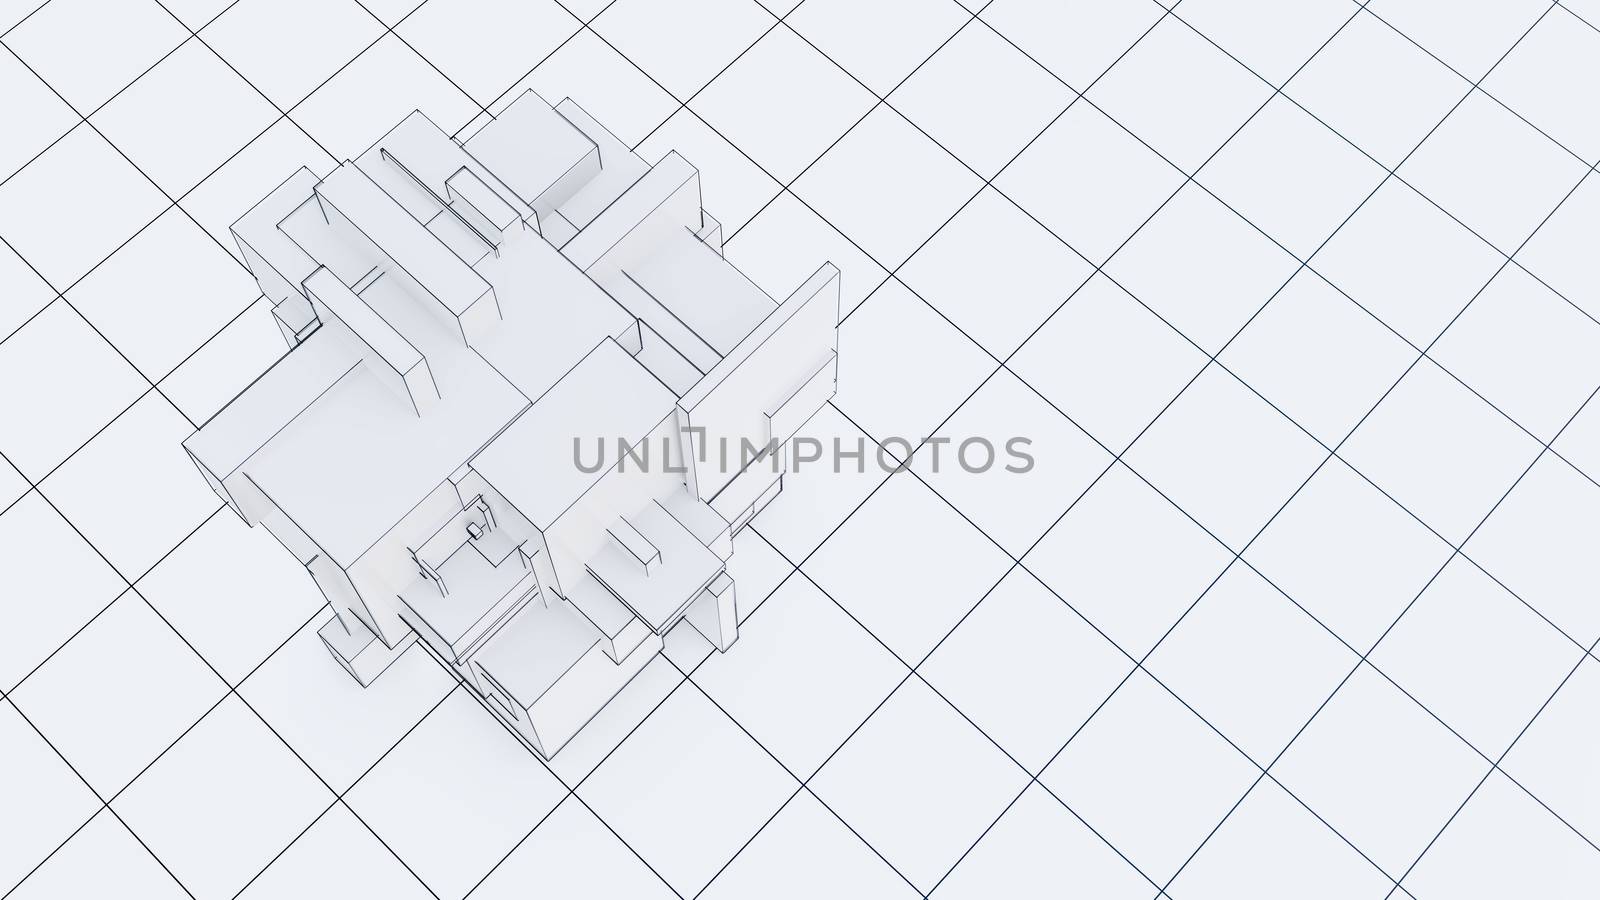 Abstract 3d object consisting of cubes. White background and grid on the floor. Technological 3d illustration for background